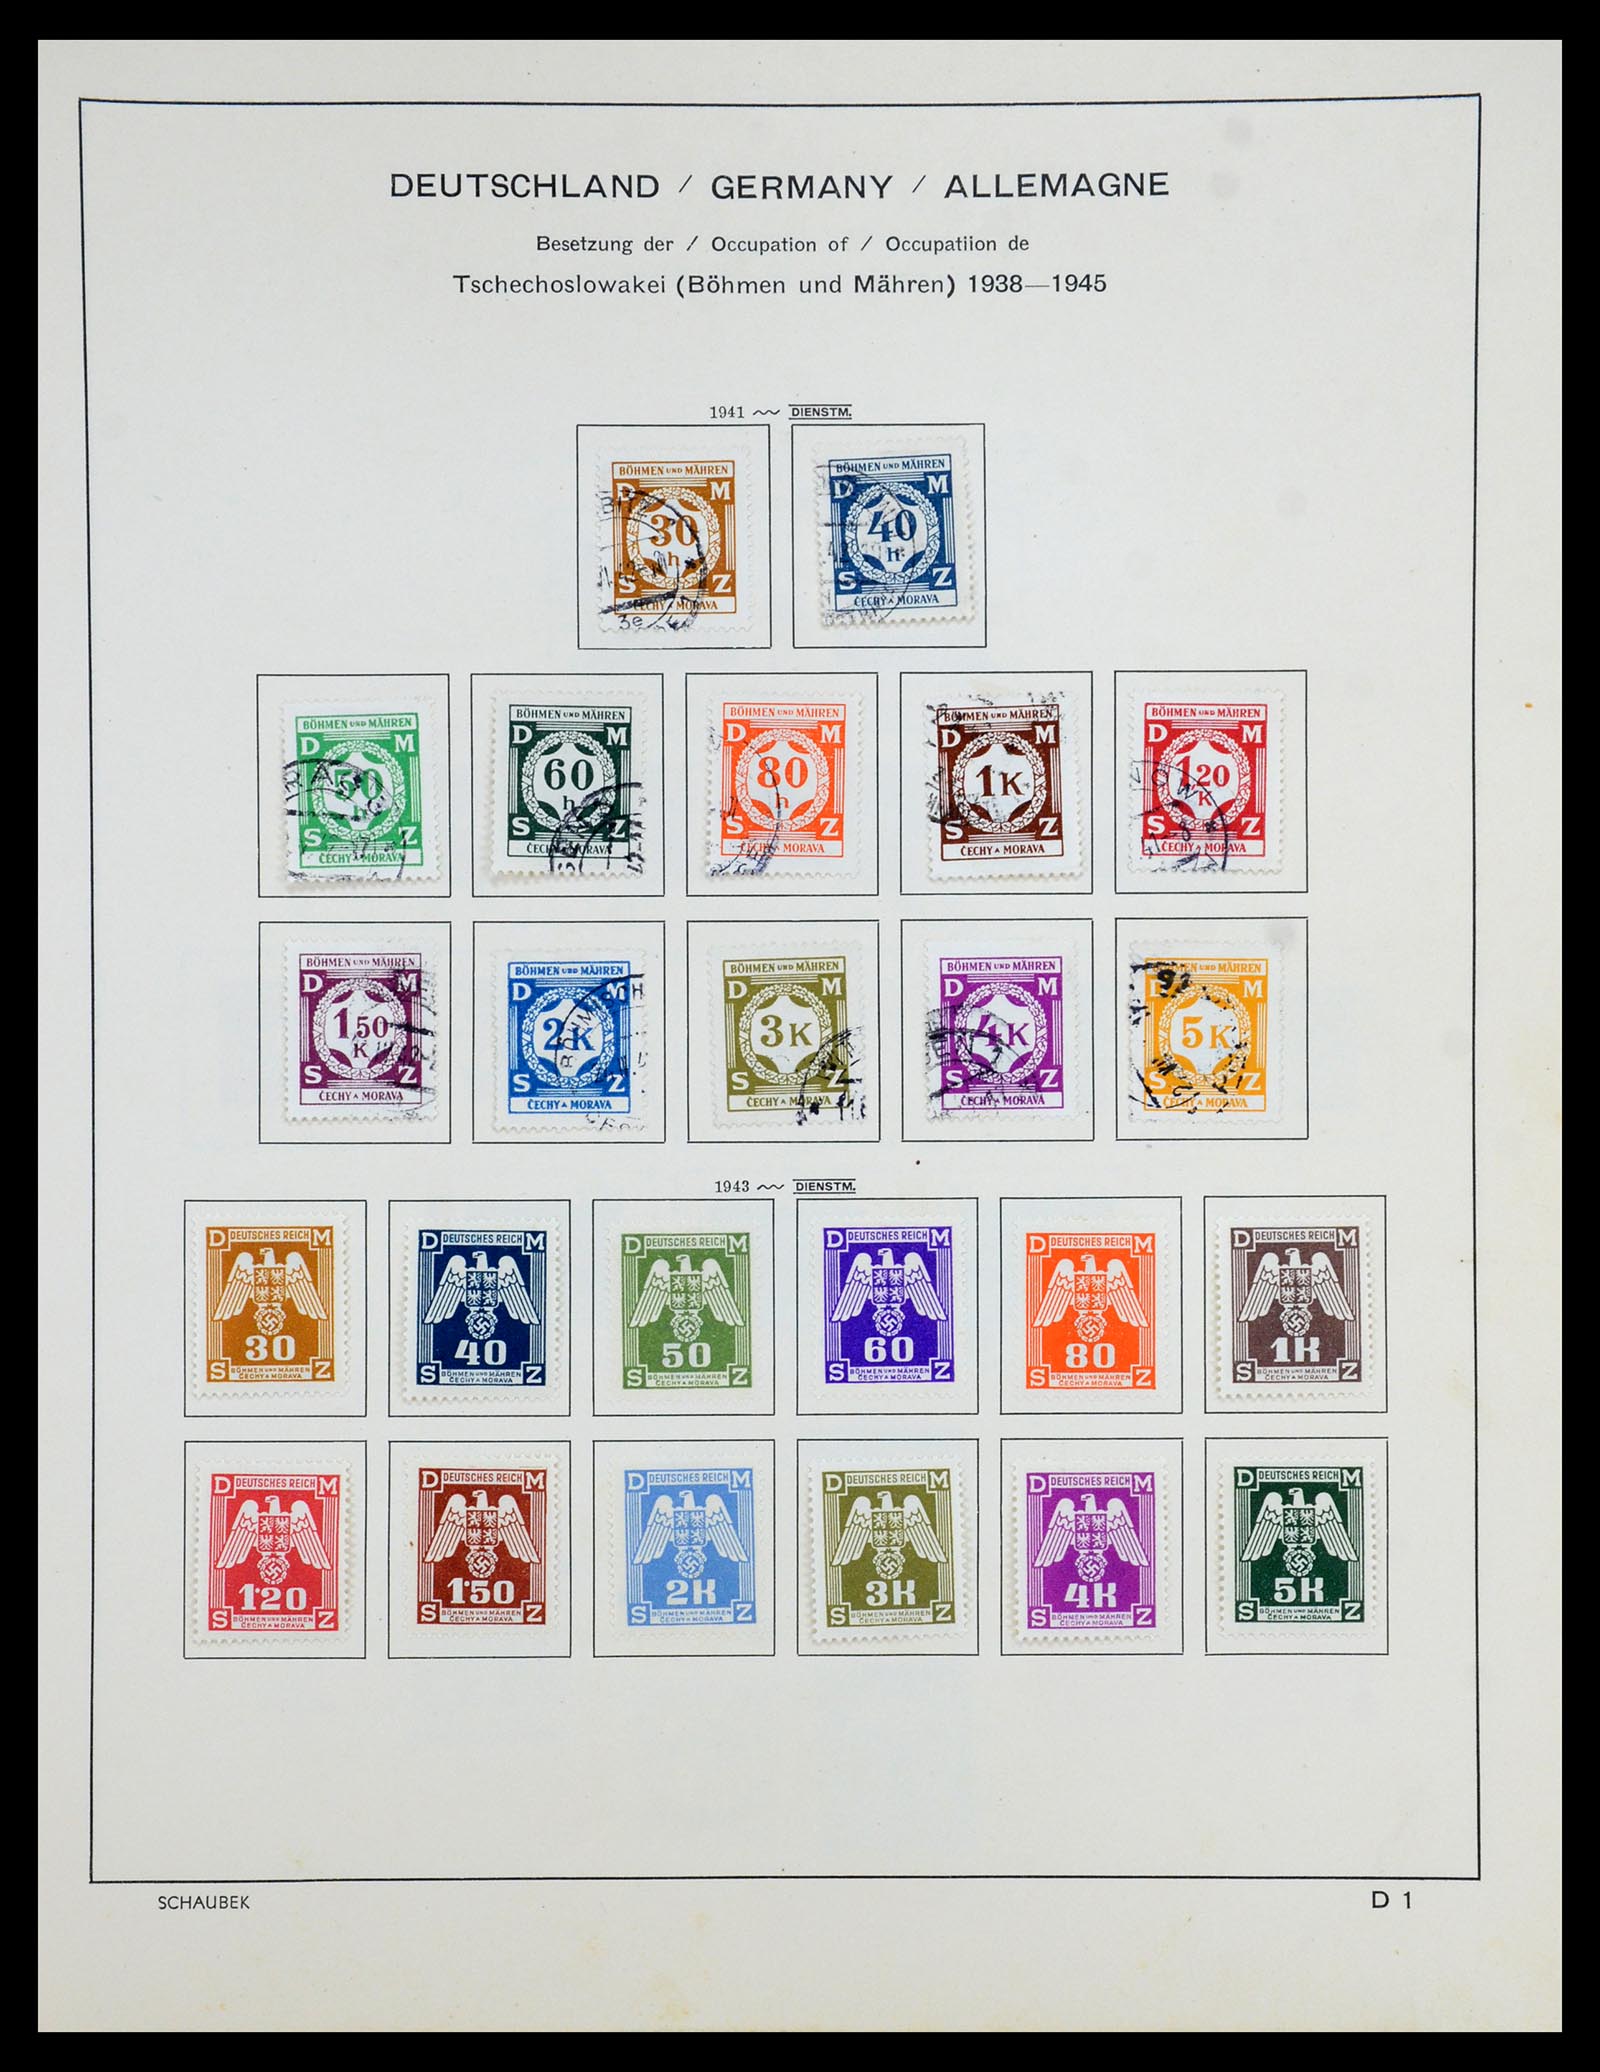 35964 028 - Stamp collection 35964 Germany occupations WW II 1939-1945.